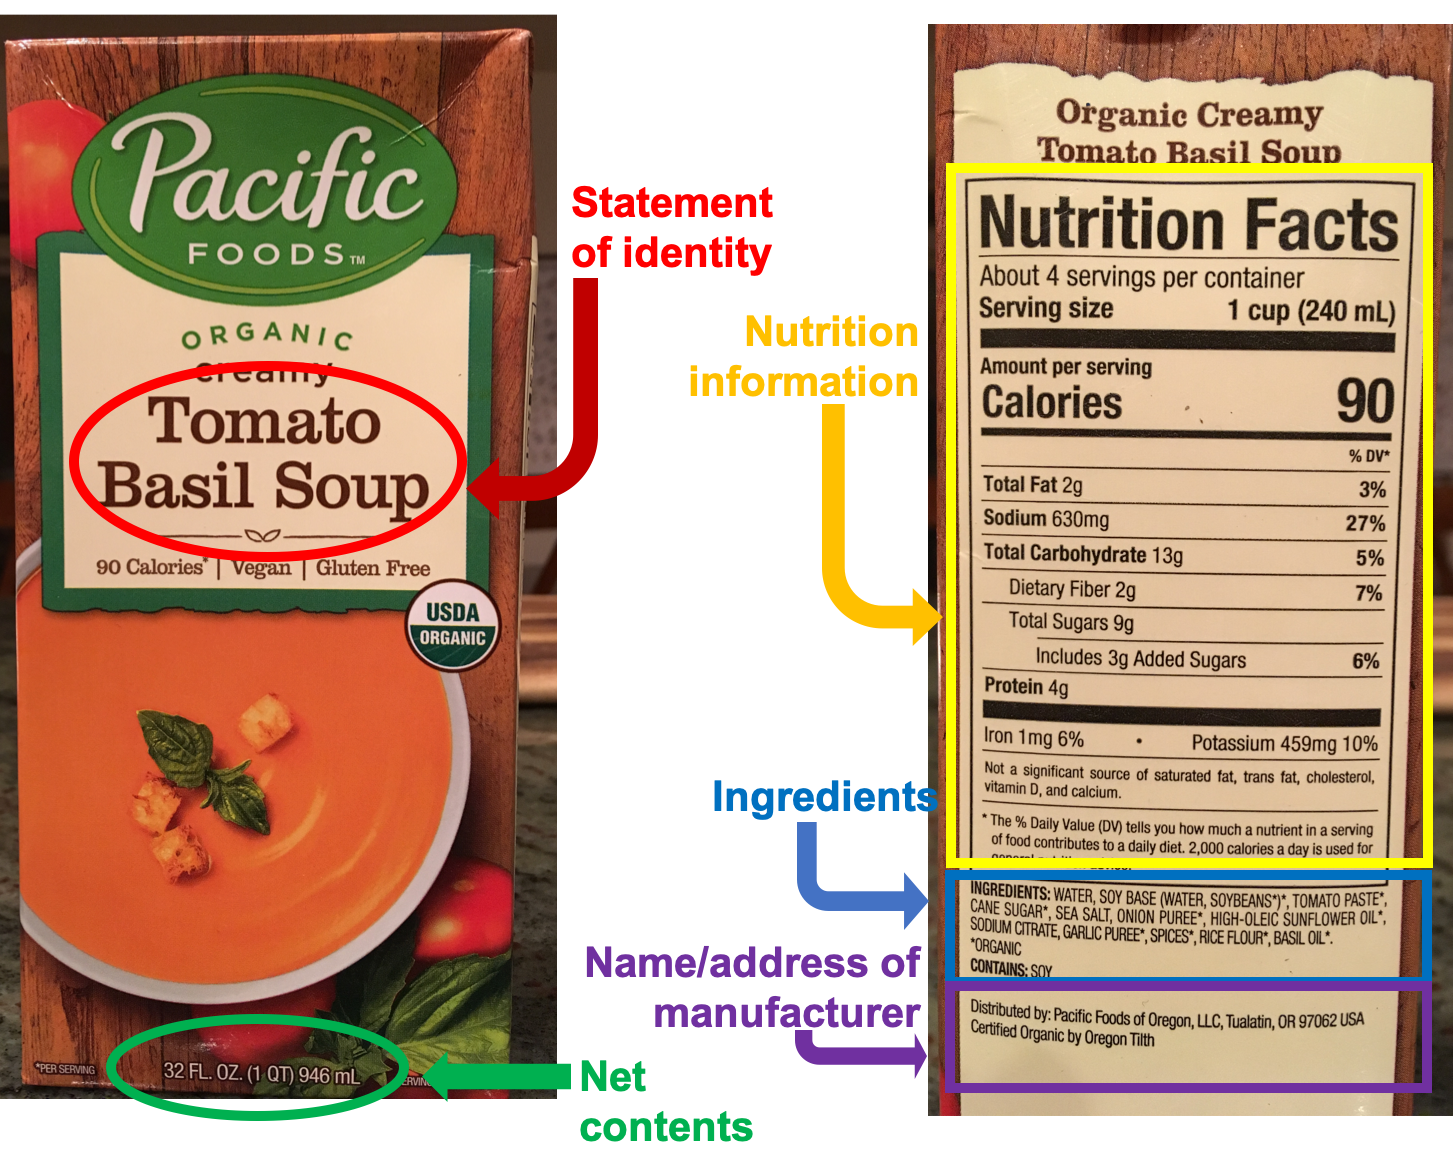 Photos of the front and back of a carton of tomato basil soup, with the 5 required types of information required on food labels circled. On the front, the statement of identity ("Tomato Basil Soup") and the net contents (32 FL OZ) are circled. On the back, the nutrition information (Nutrition Facts), ingredient list, and name/address of manufacturer are circled.